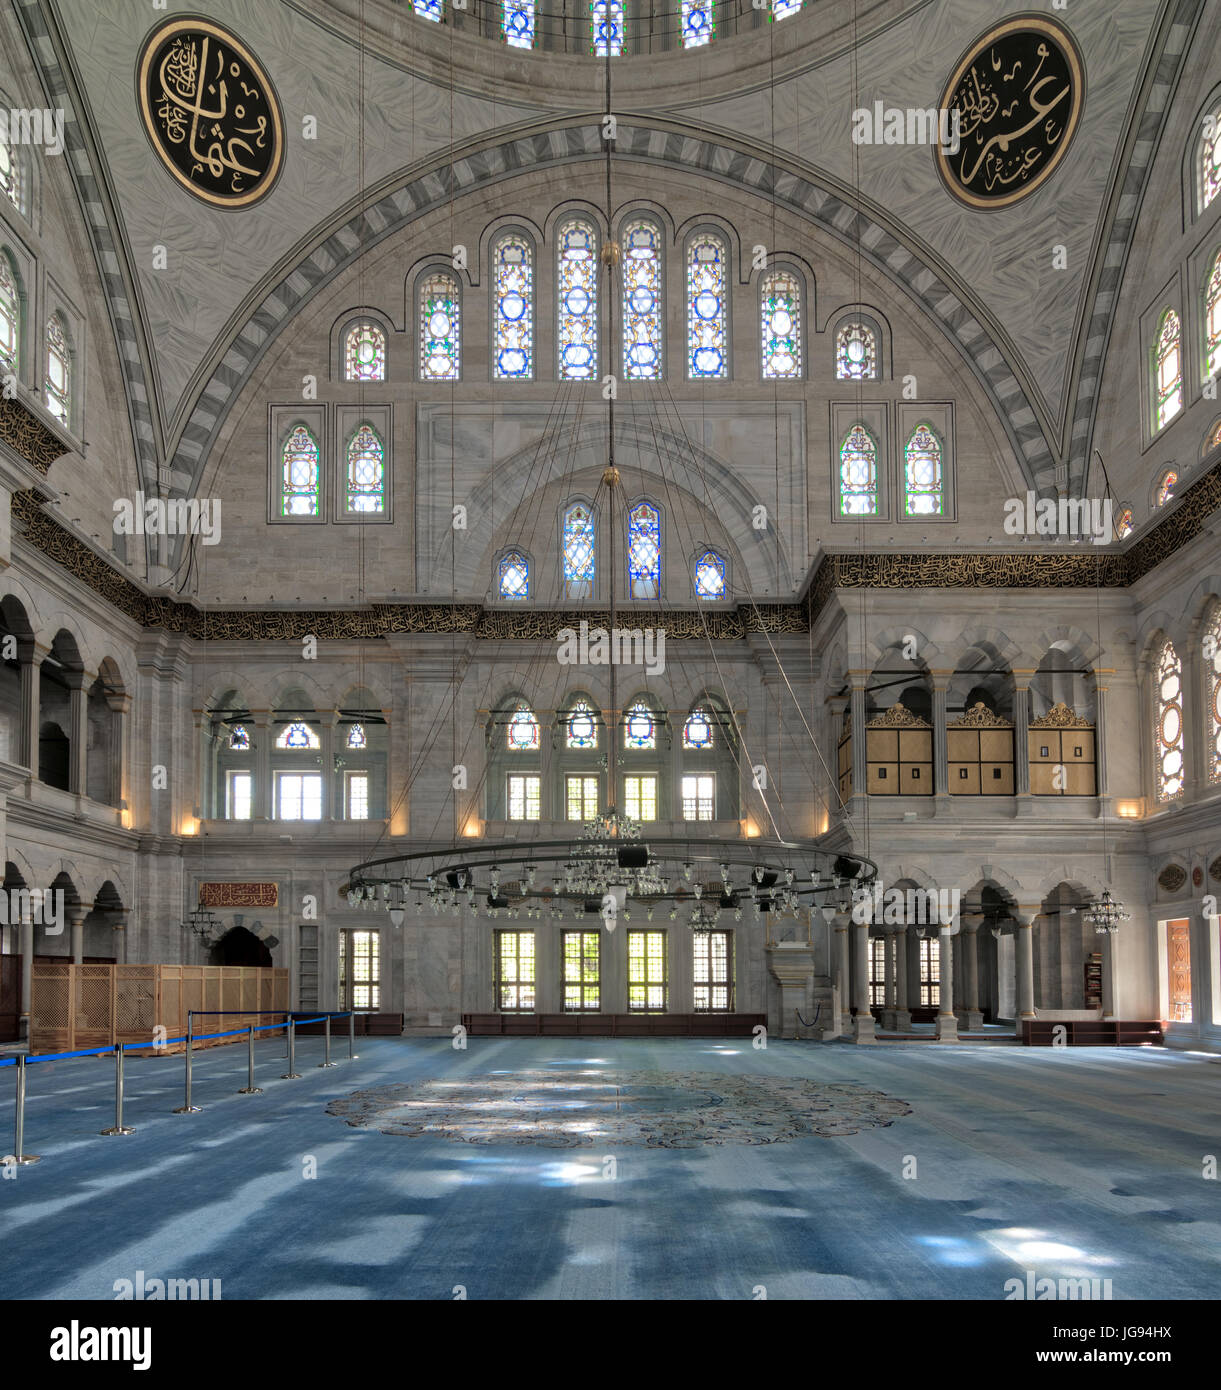 Interior of Nuruosmaniye Mosque, an Ottoman Baroque style mosque built in 1755, with a huge arches & many colored stained glass windows located in She Stock Photo